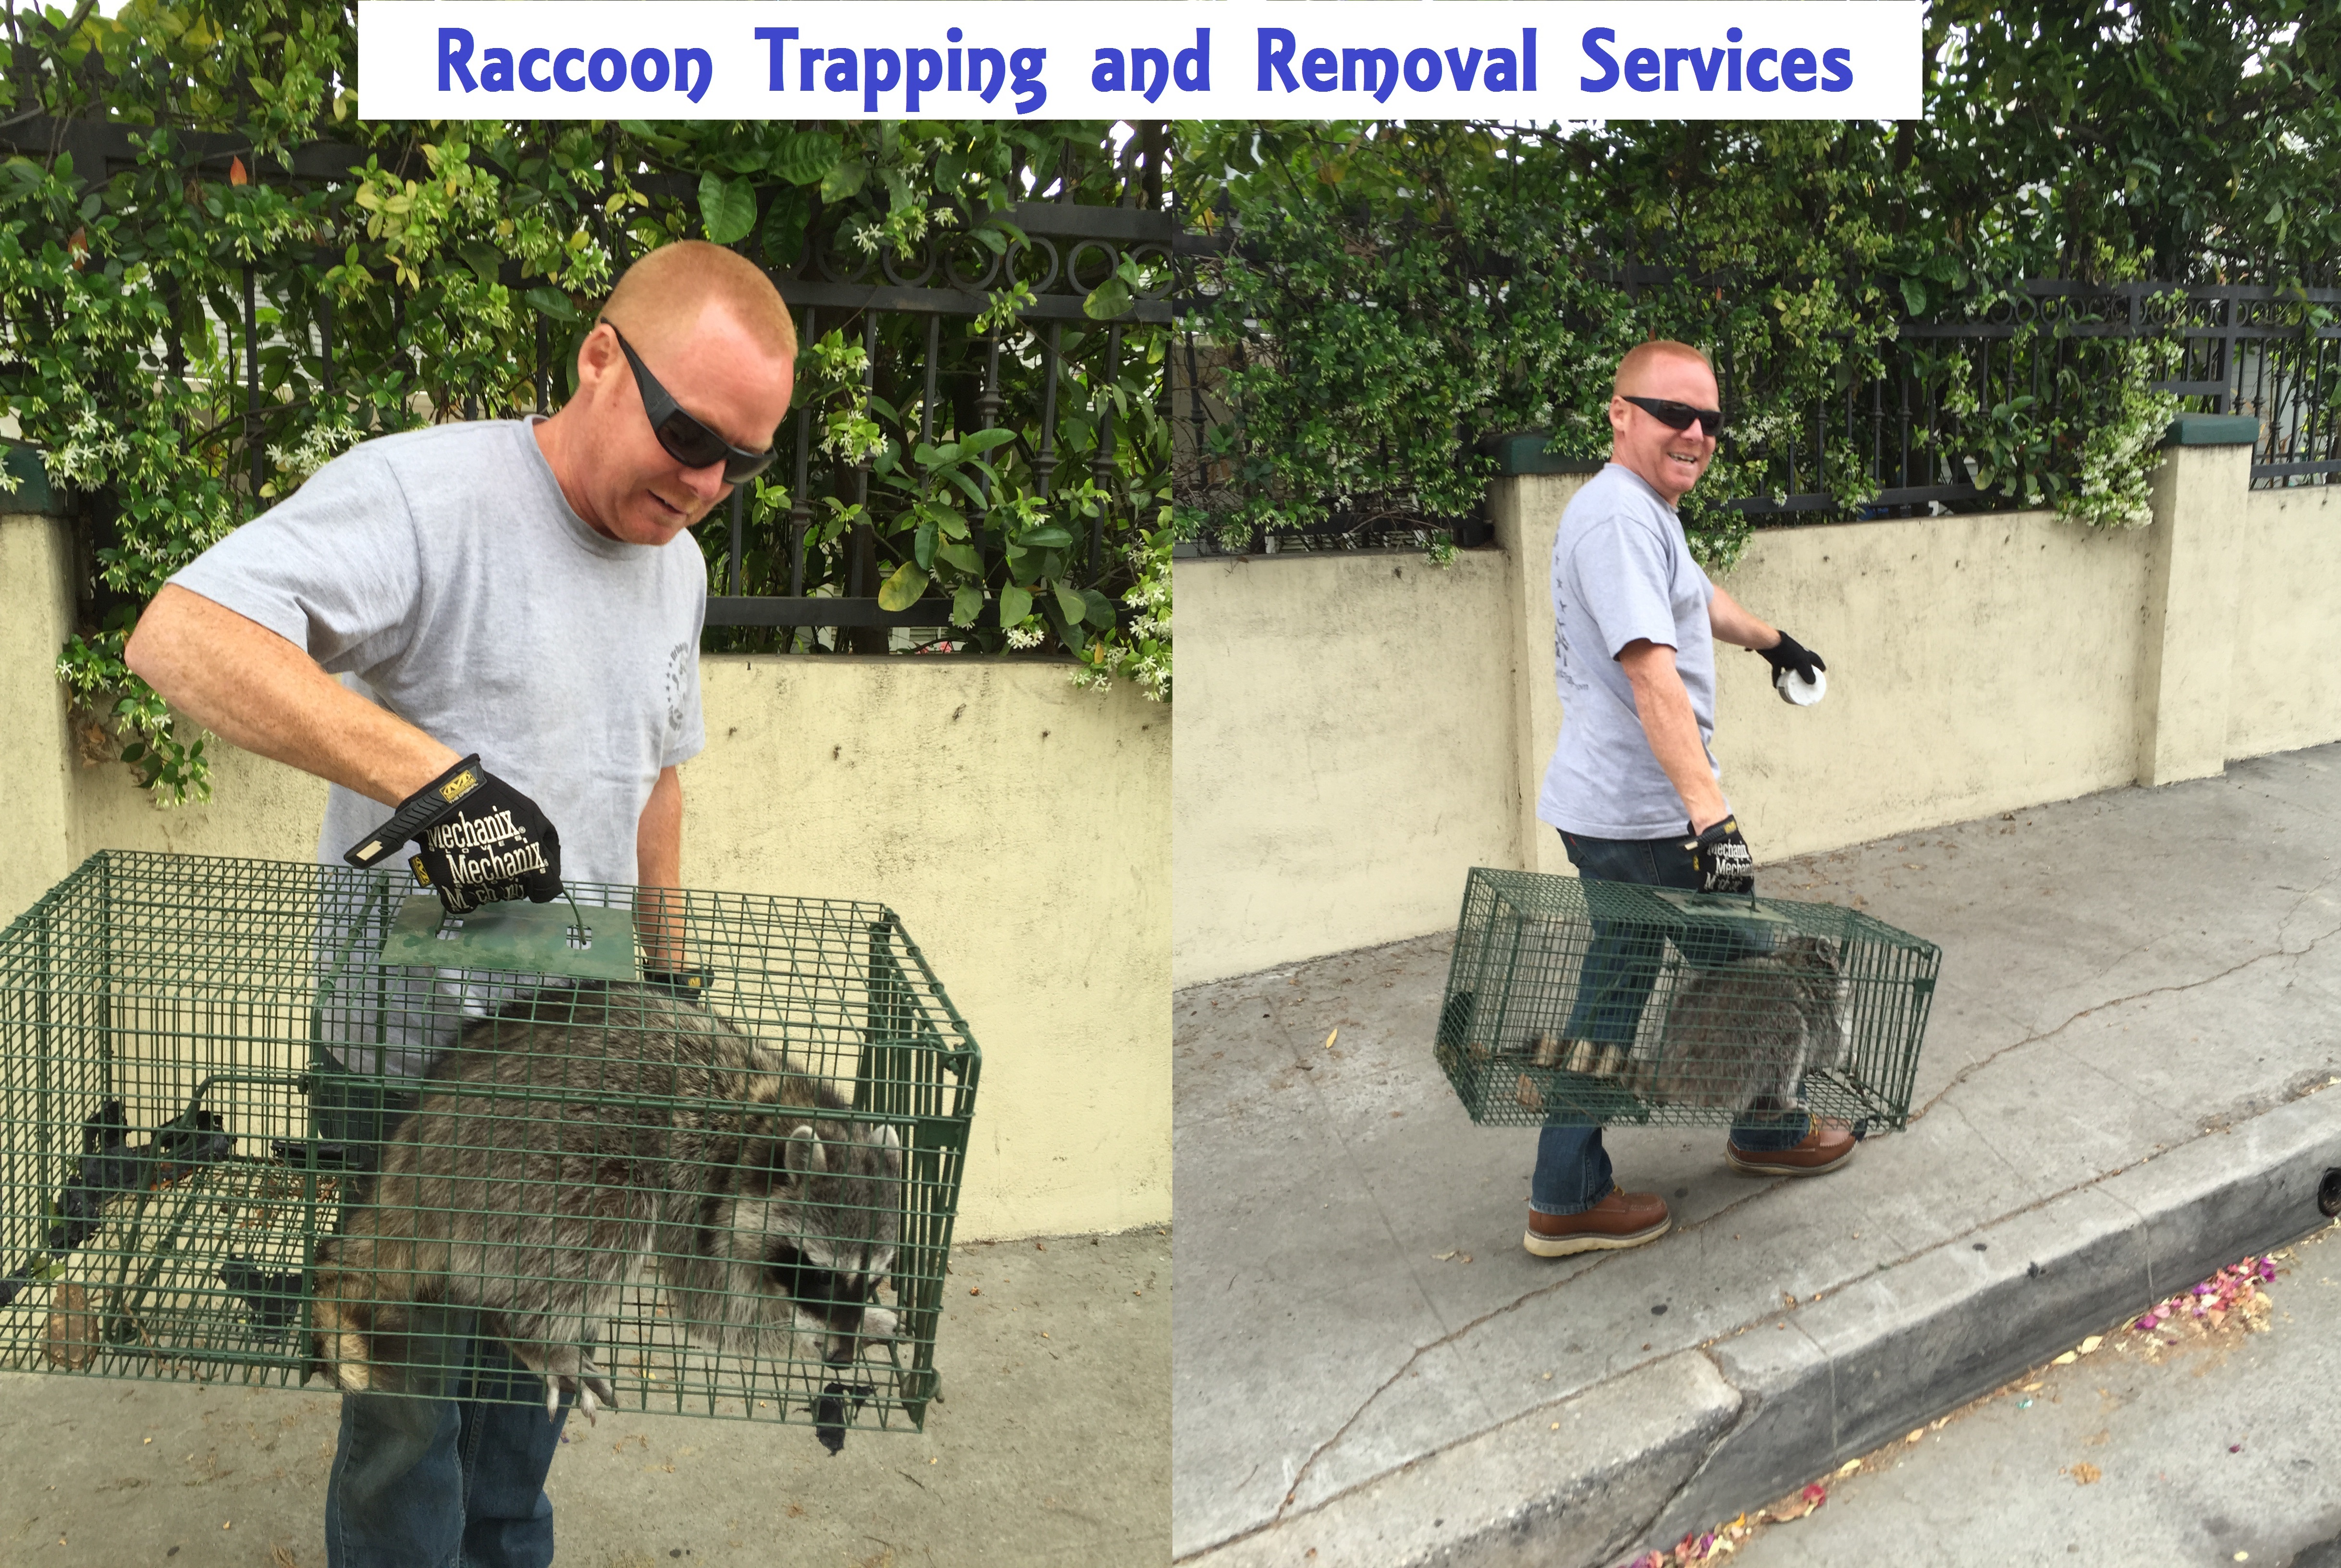 Matt H. Raccoon Trapping and Removal Services